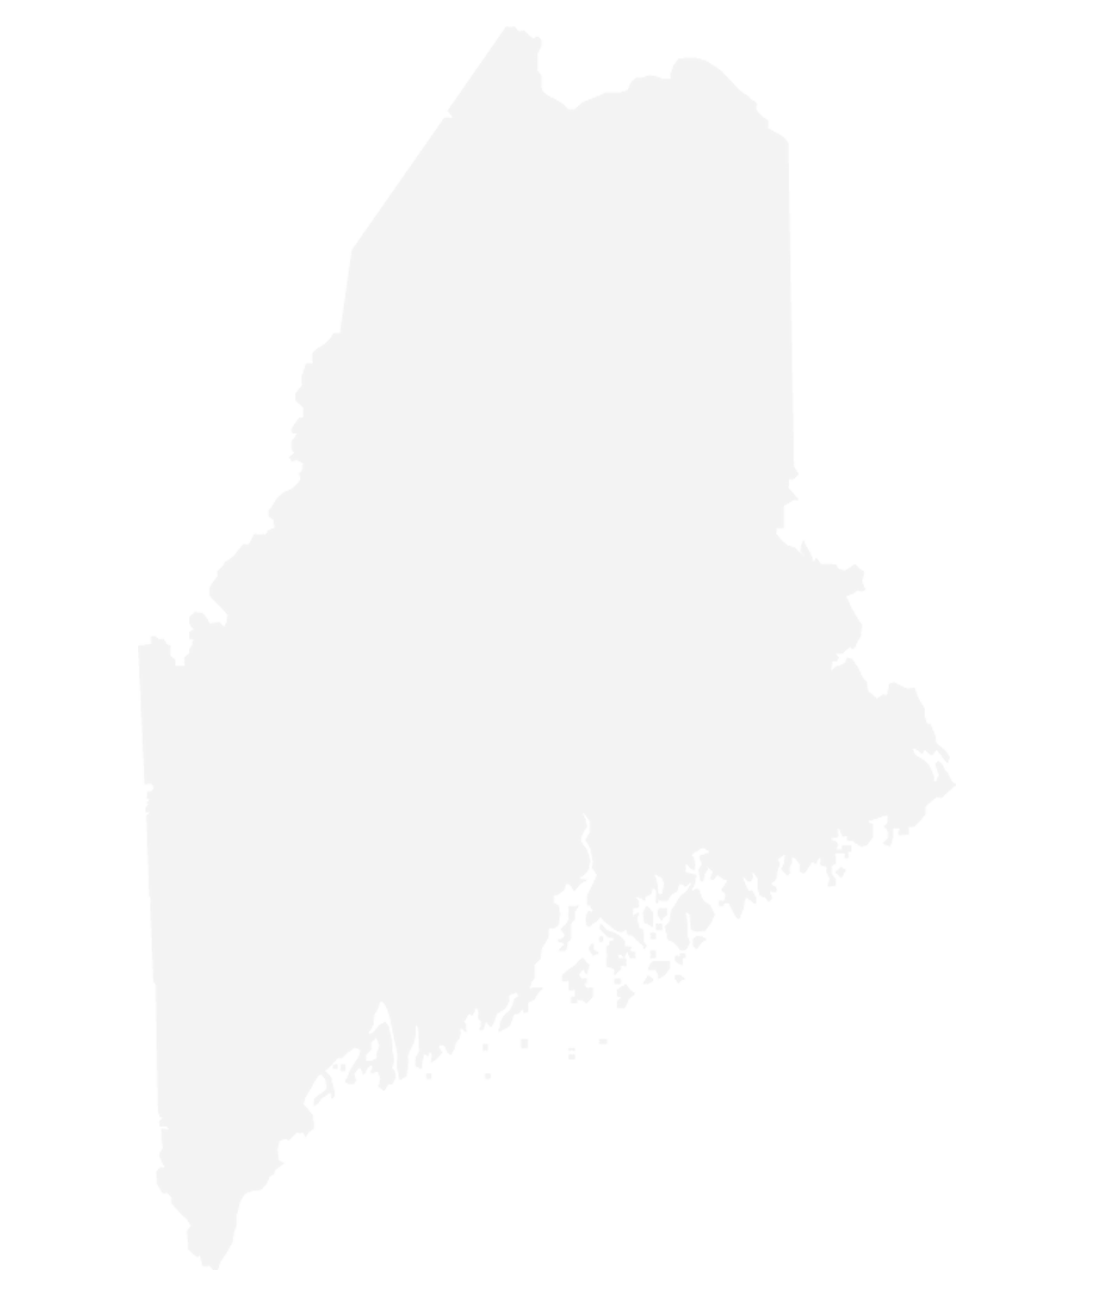 Maine Election Worker Recruitment